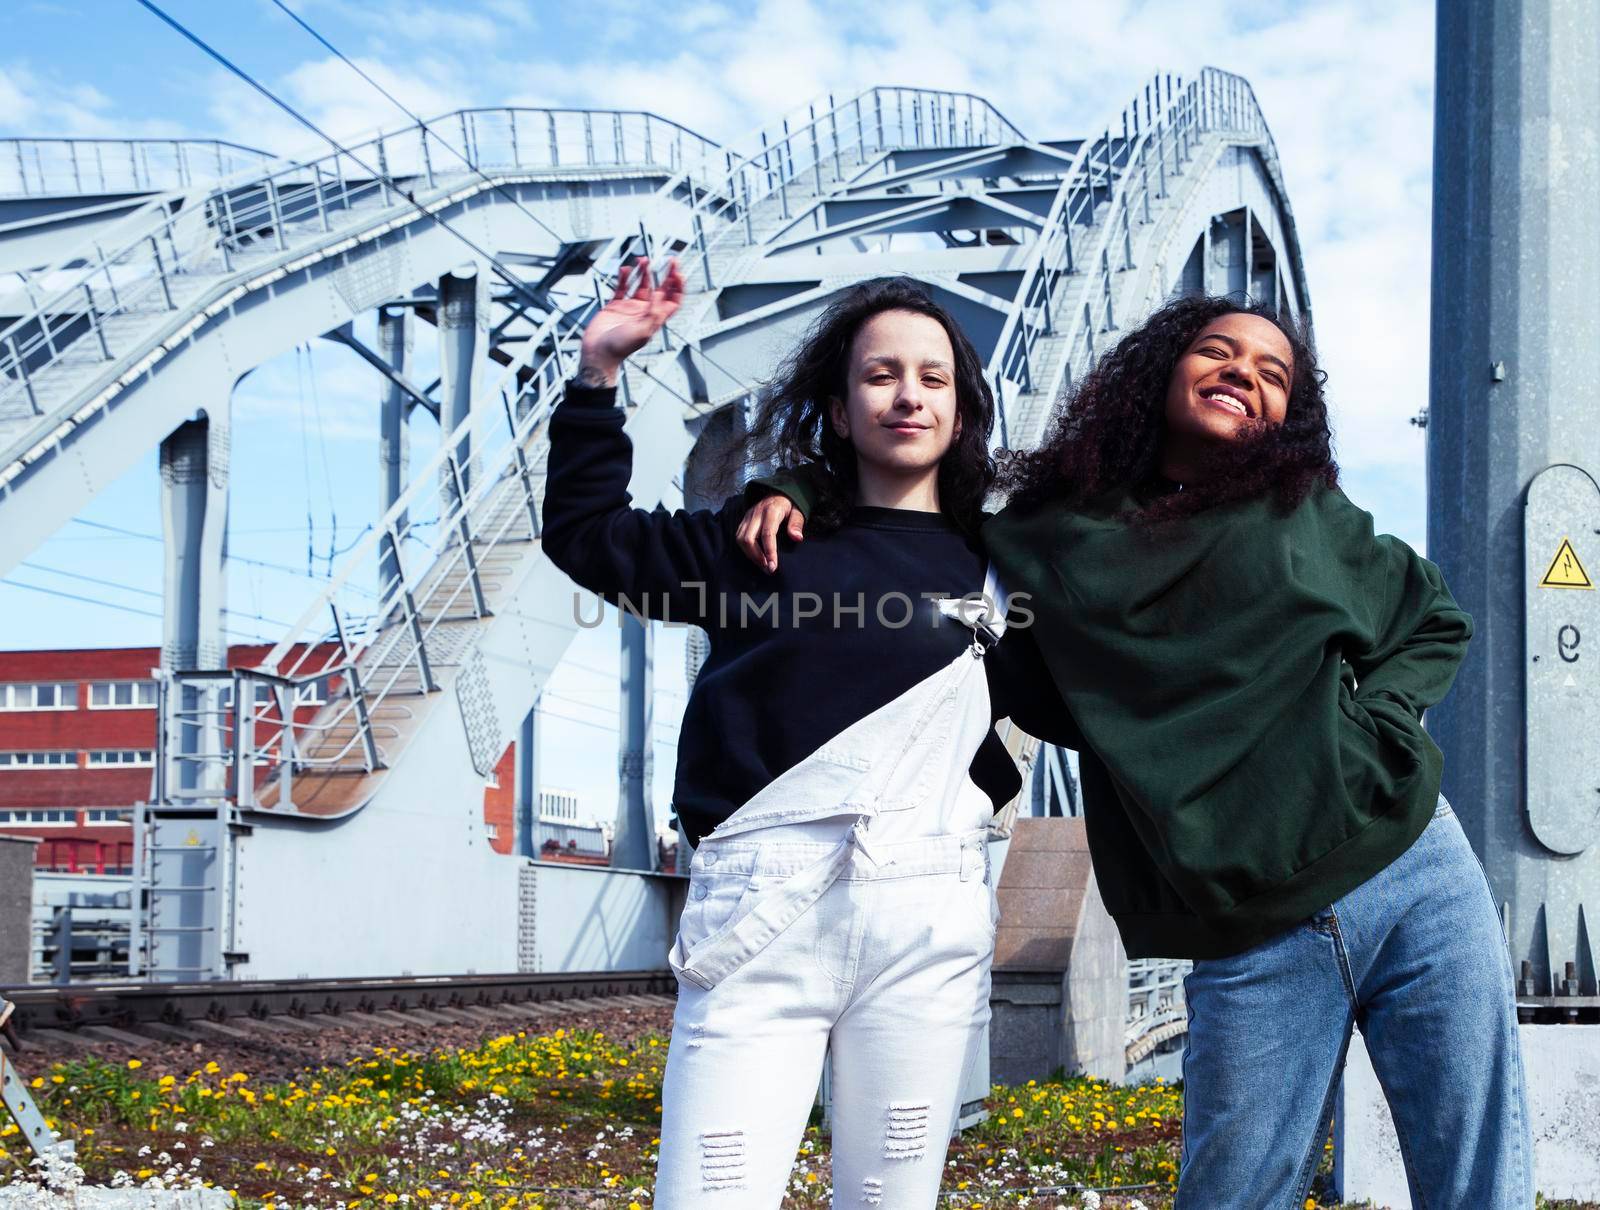 young cute teenage girls together in industrial zone happy smiling having fun, big city lifestyle fashion people by JordanJ